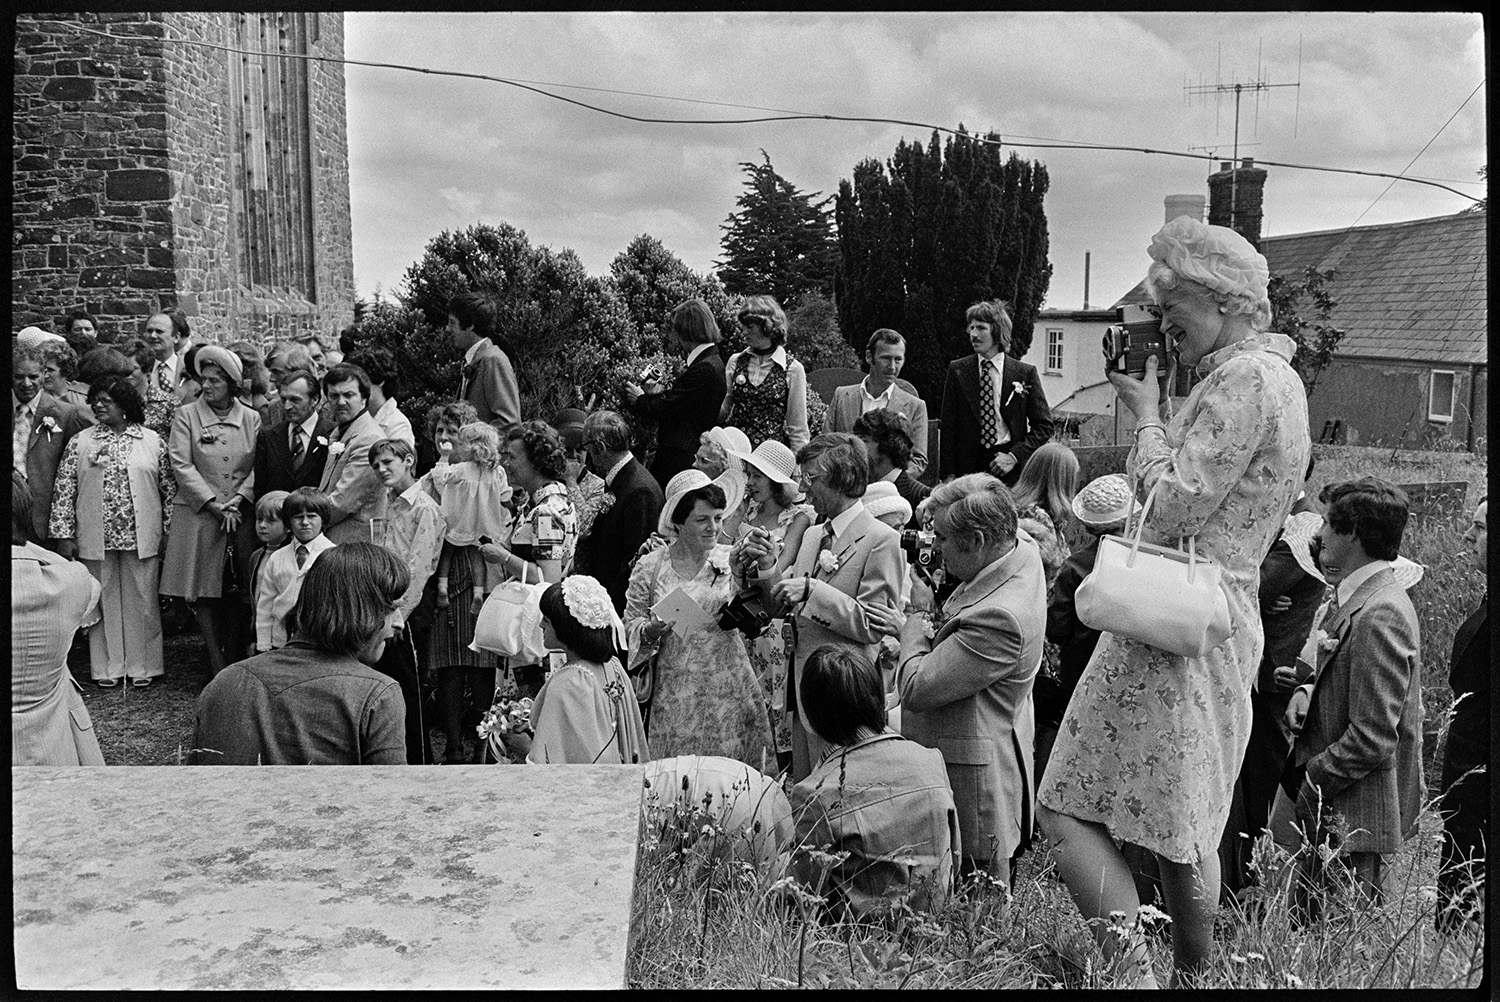 Couple and guests outside church after wedding, photographs, chatting, vicar going home. 
[Wedding guests gathered outside Atherington Church after Helen Siviter's wedding. A woman in the foreground is taking a photograph.]